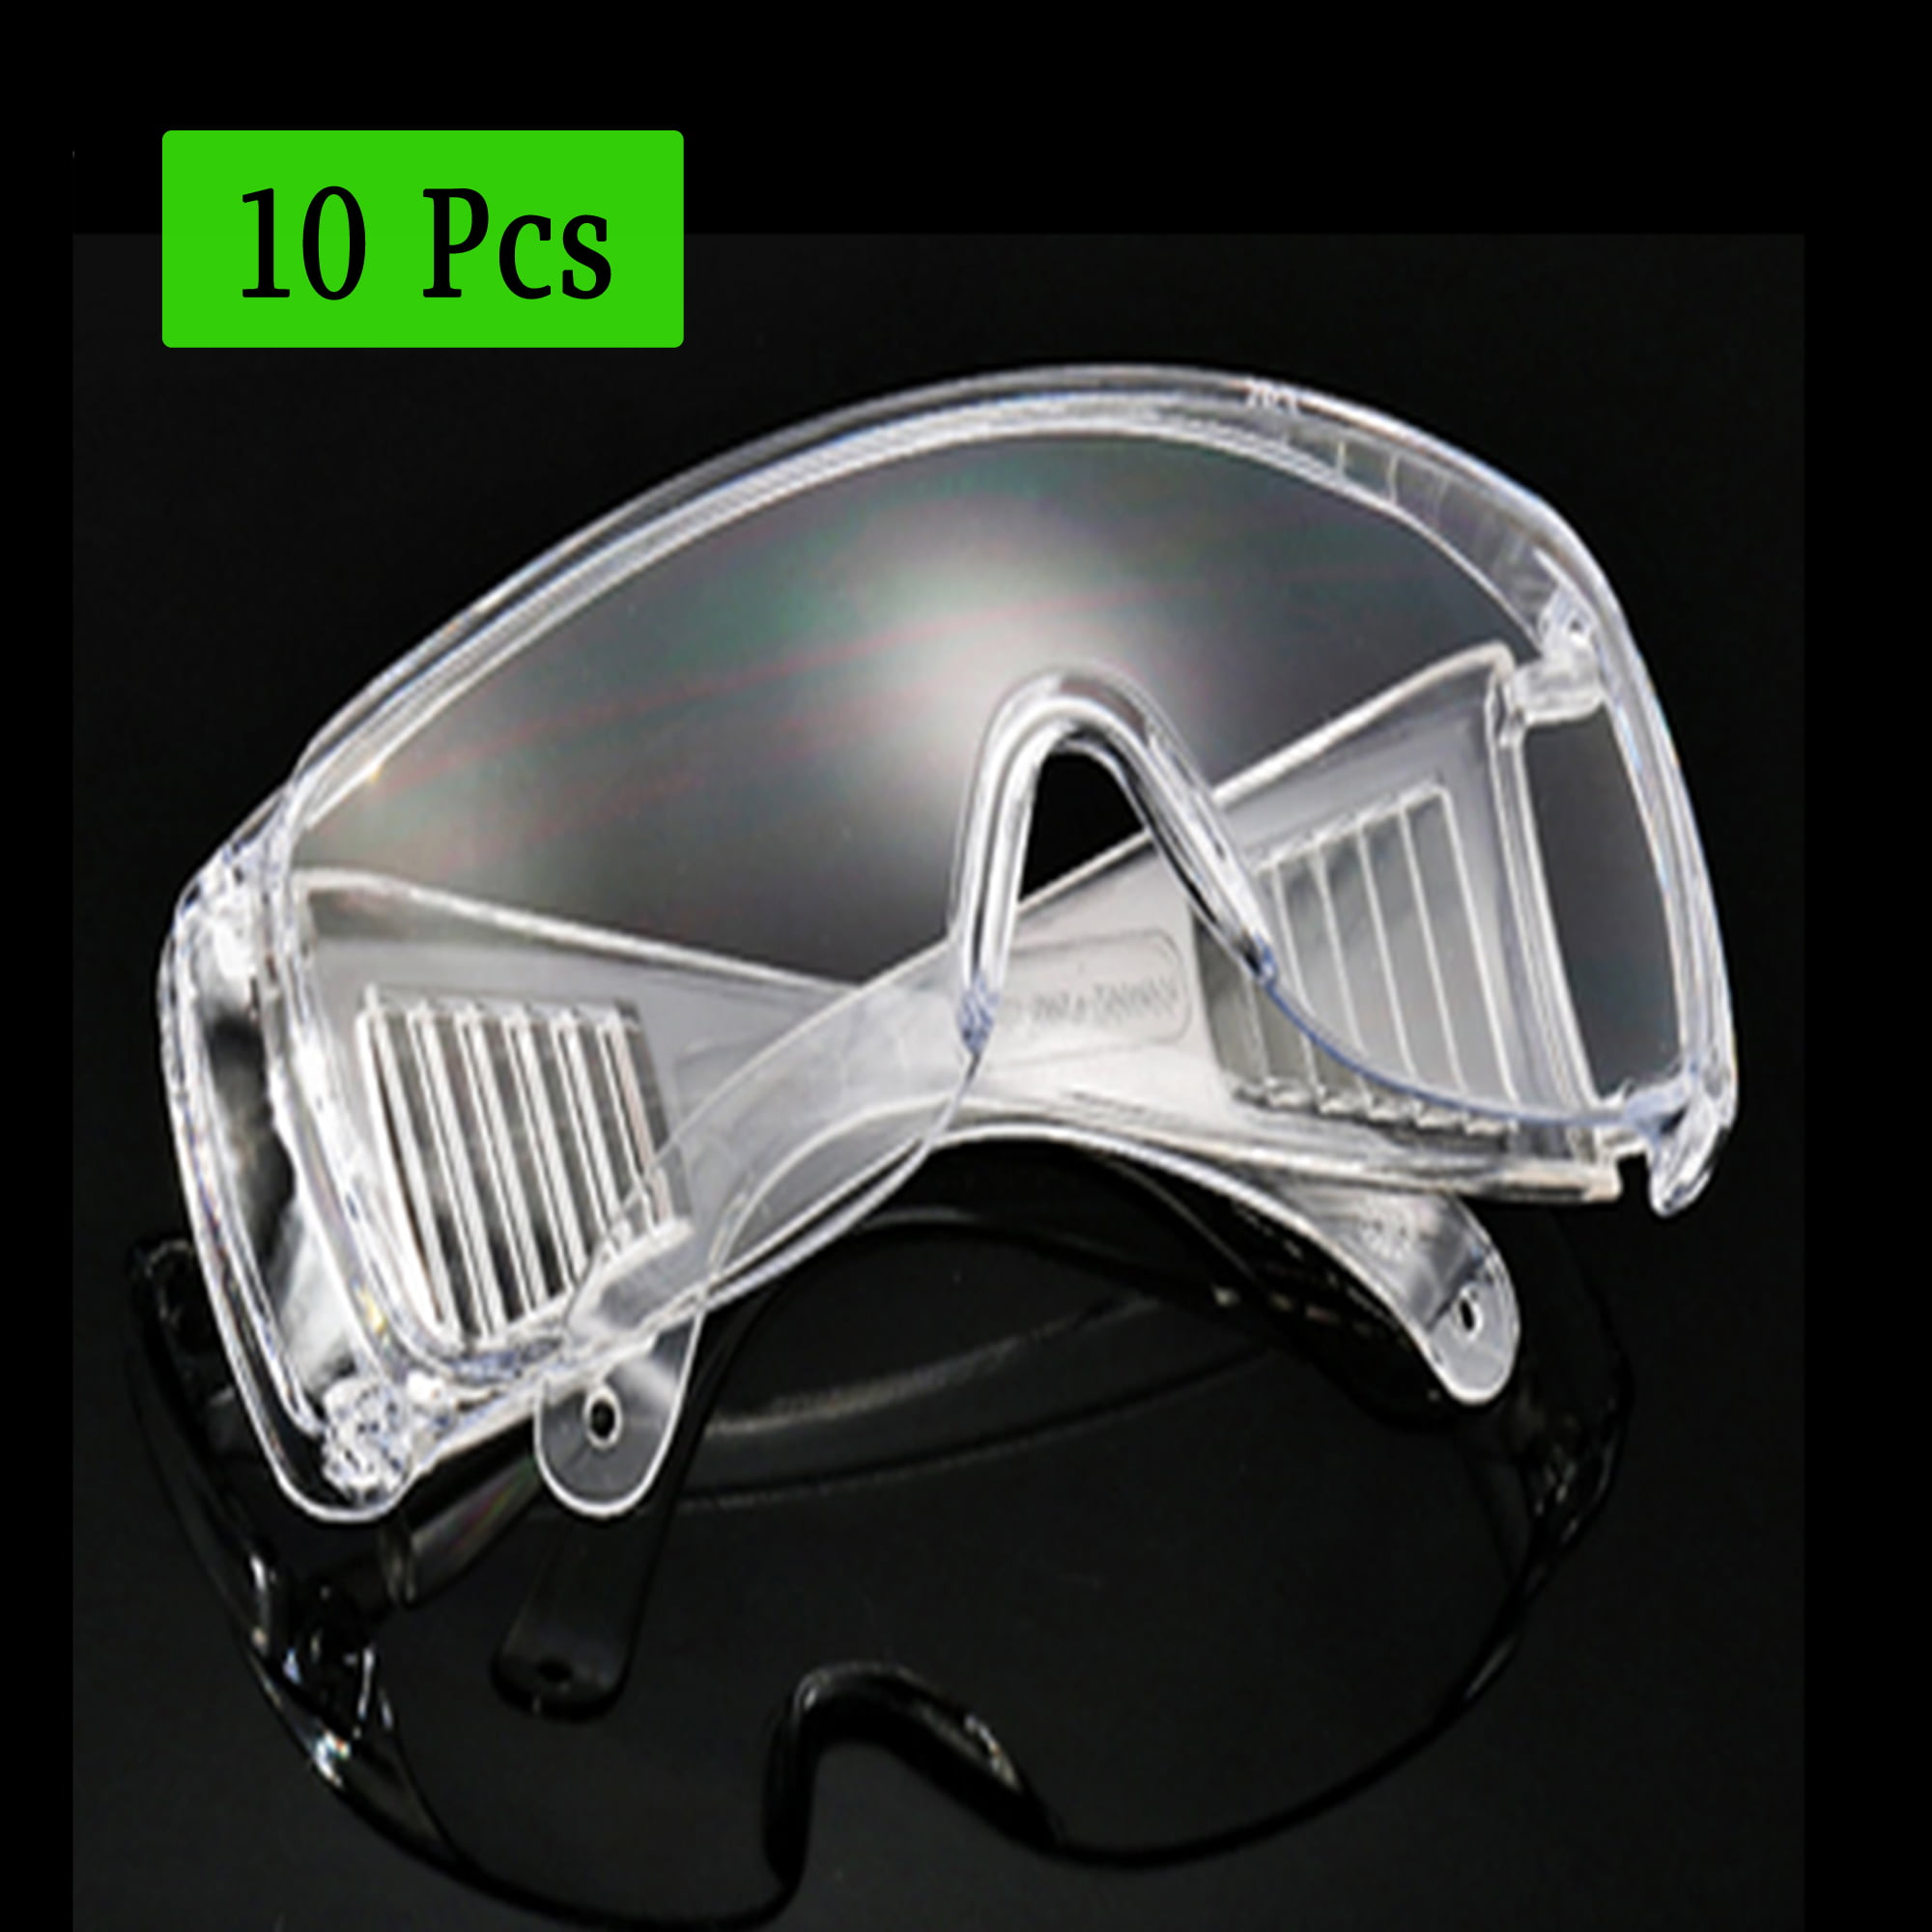 Reusable Protective Glasses Safety Glasses Anti-Fog Film For Man And Women ZSDD Goggle Face Shield